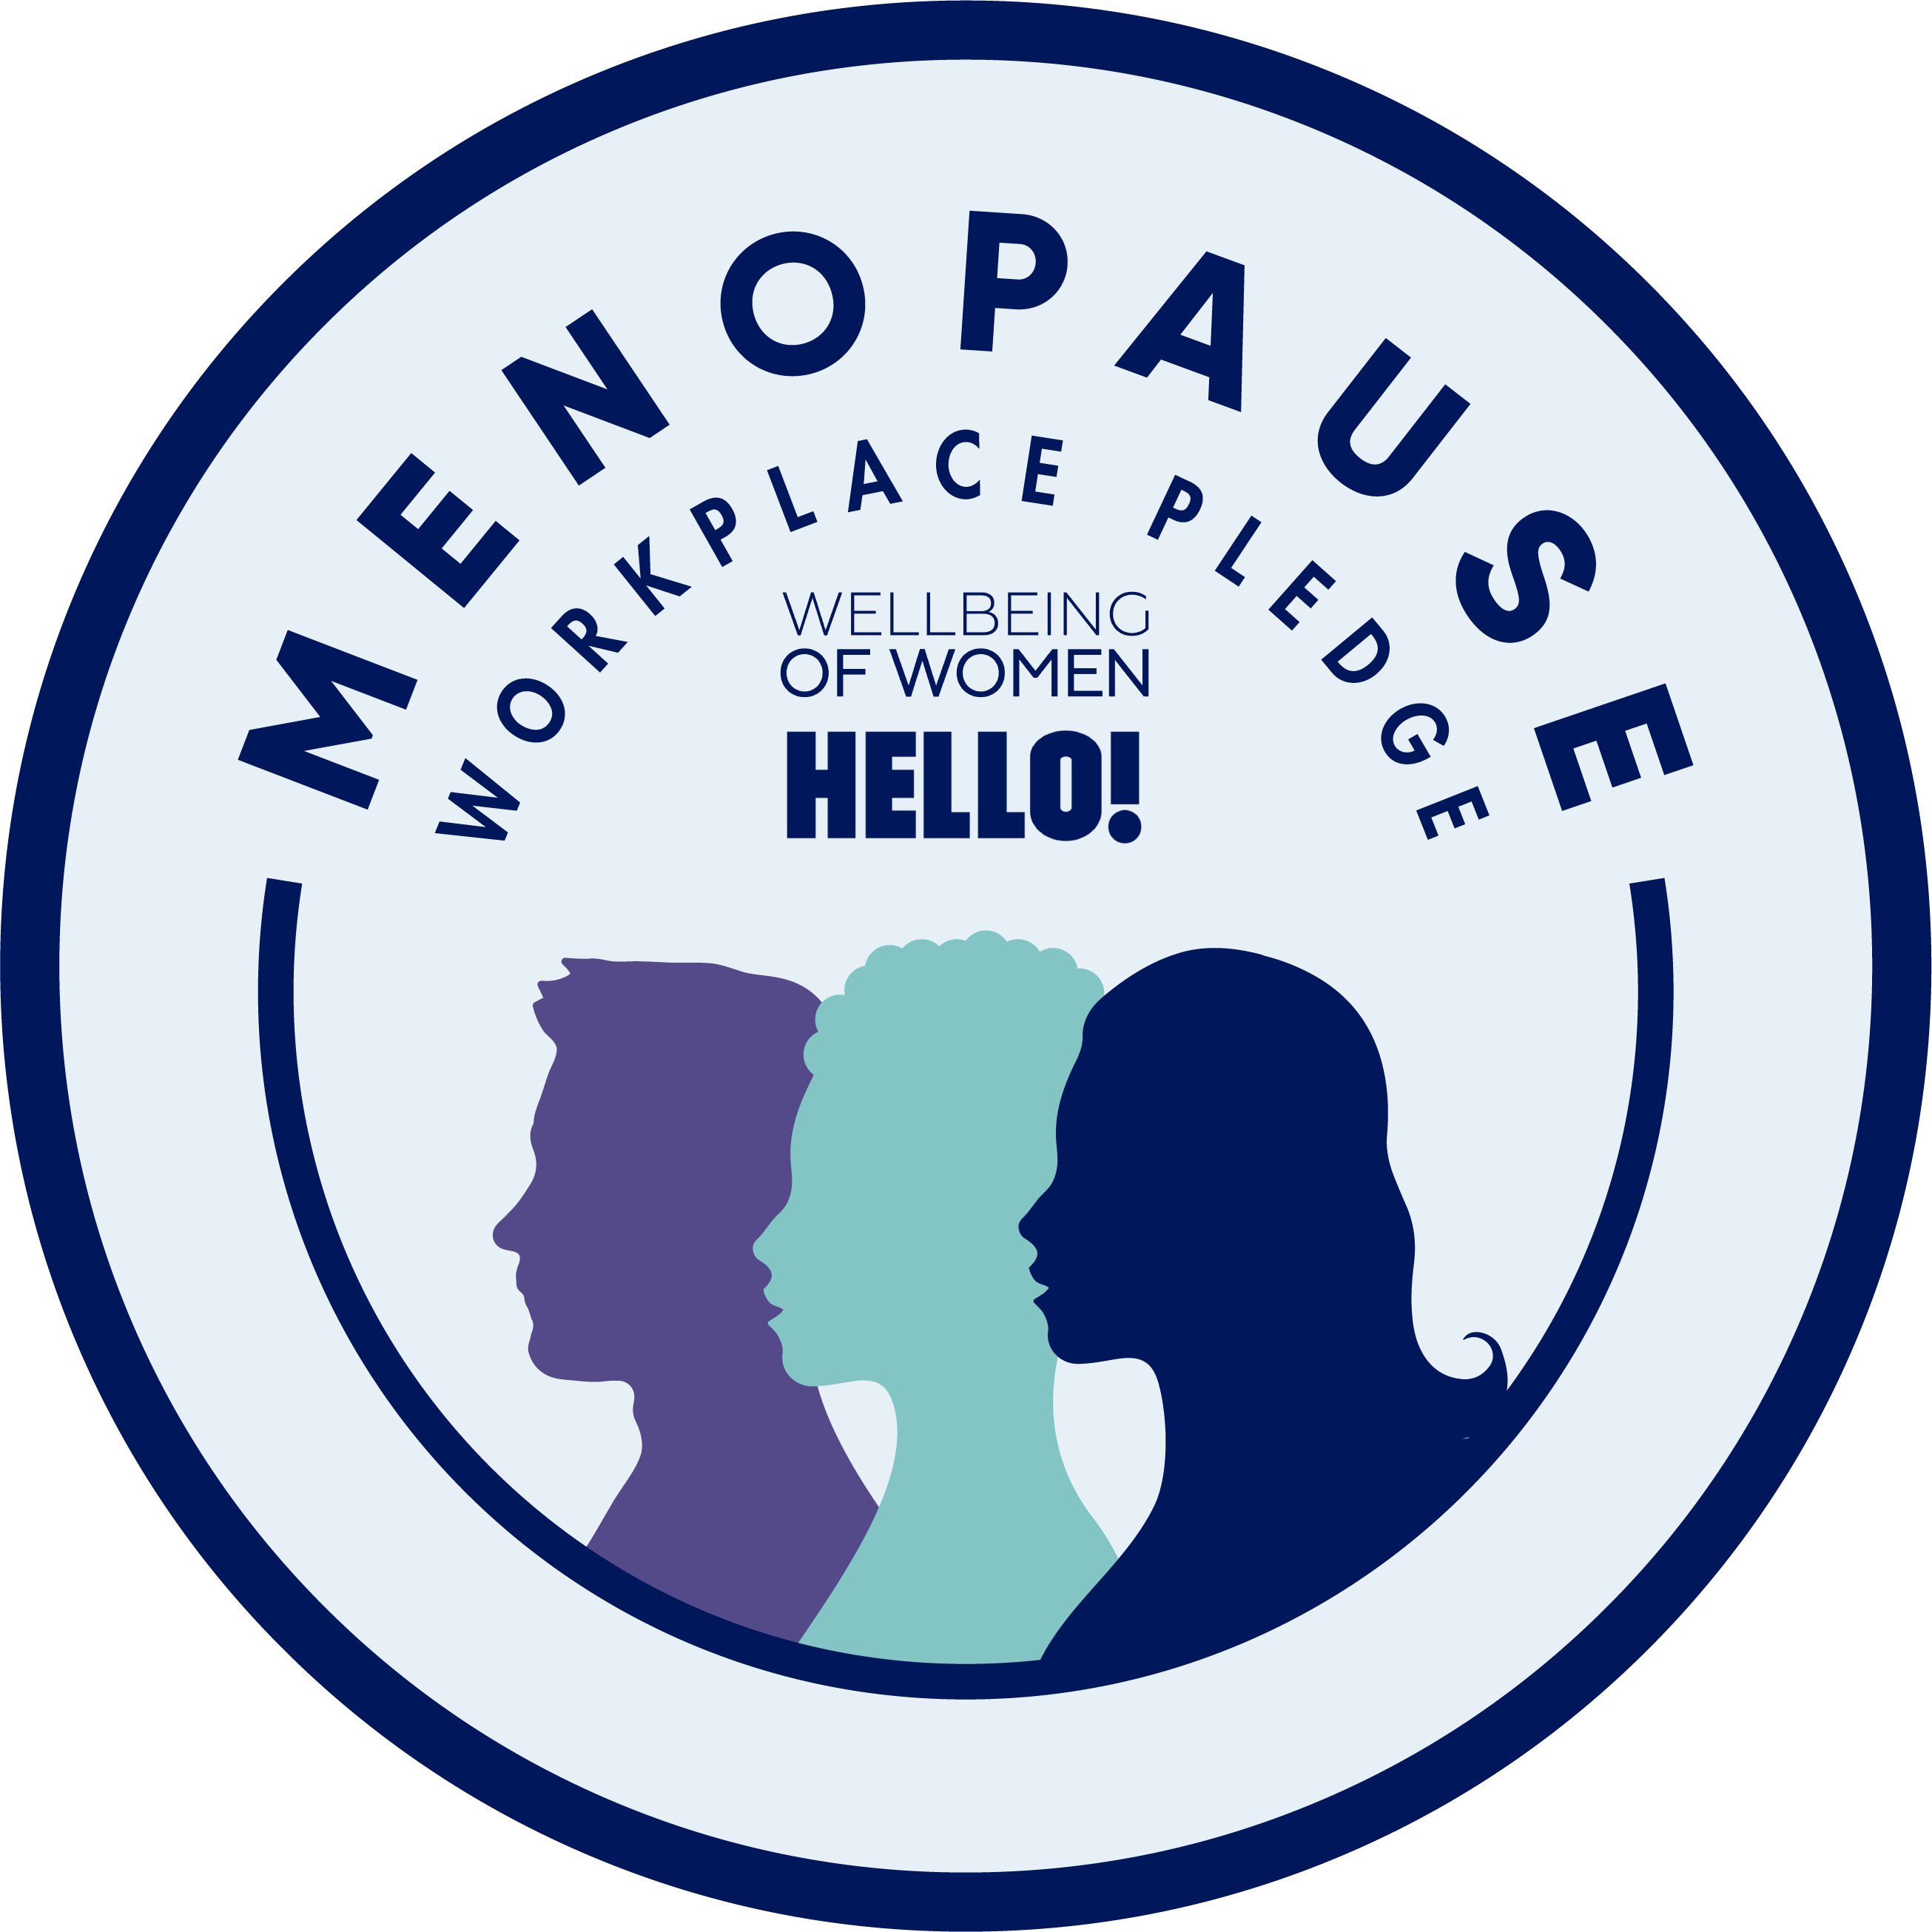 Menopause Workplace Pledge - Wellbeing of Women and HELLO!